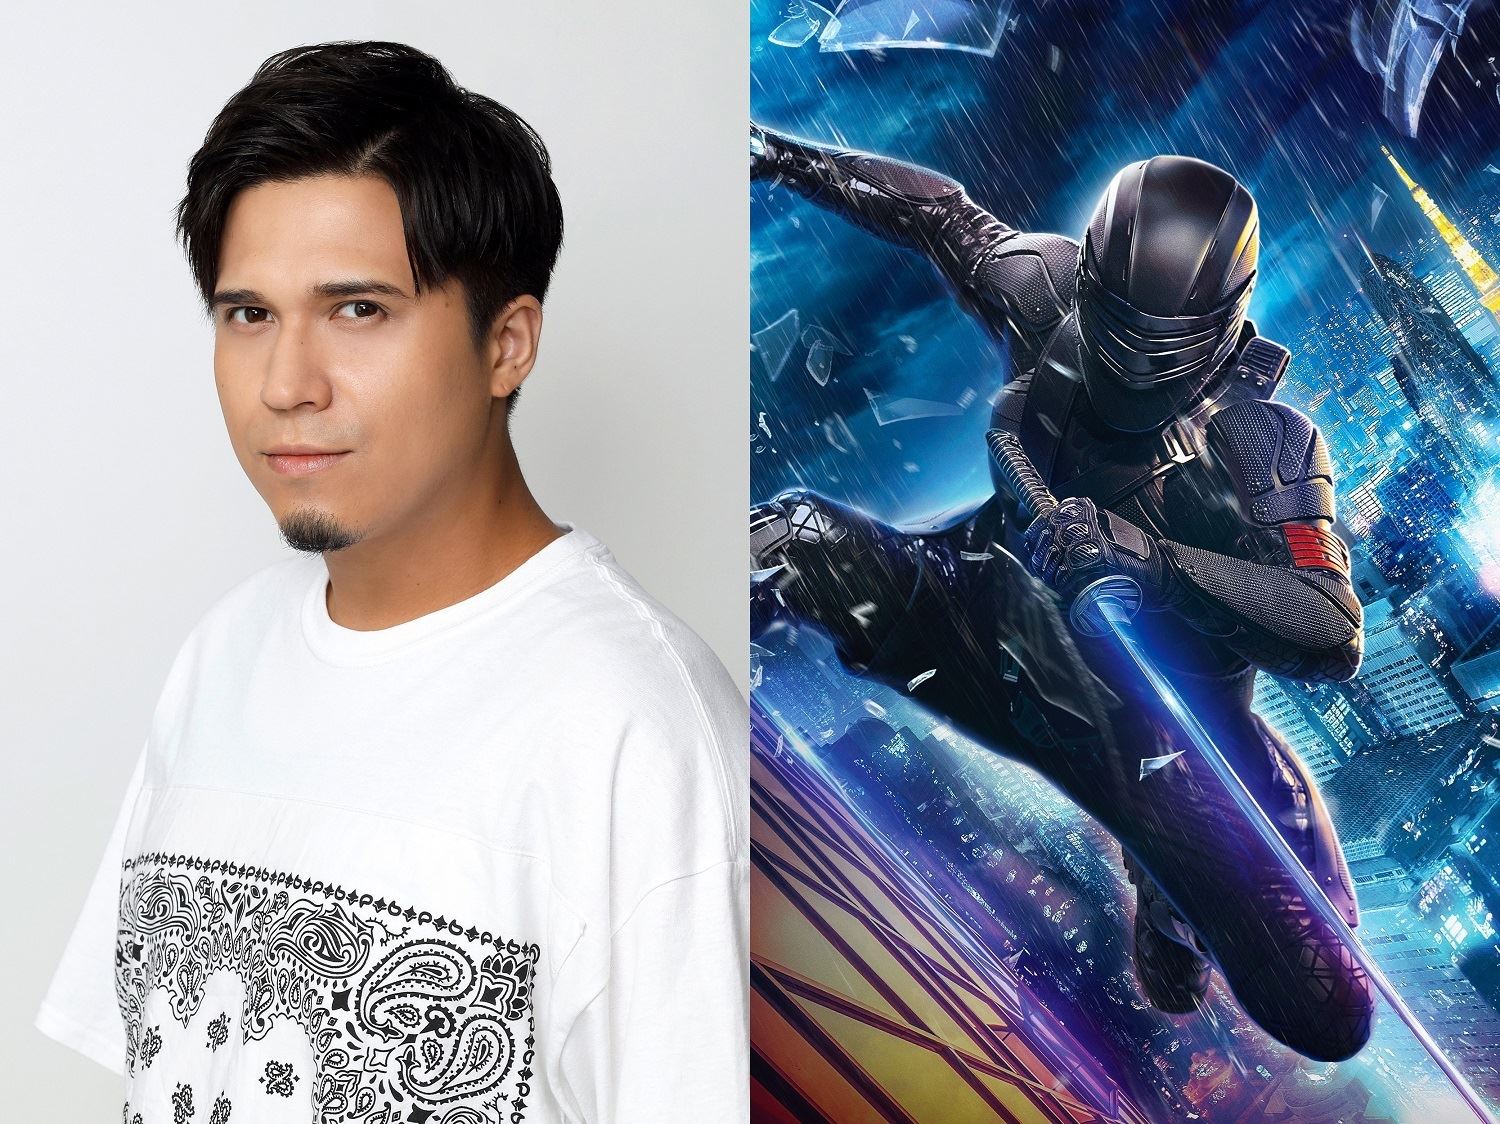 『G.I.ジョー：漆黒のスネークアイズ』木村昴（スネークアイズ吹き替え担当） (c)2021 Paramount Pictures. Hasbro, G.I. Joe and all related characters are trademarks of Hasbro. (C) 2021 Hasbro. All Rights Reserved.